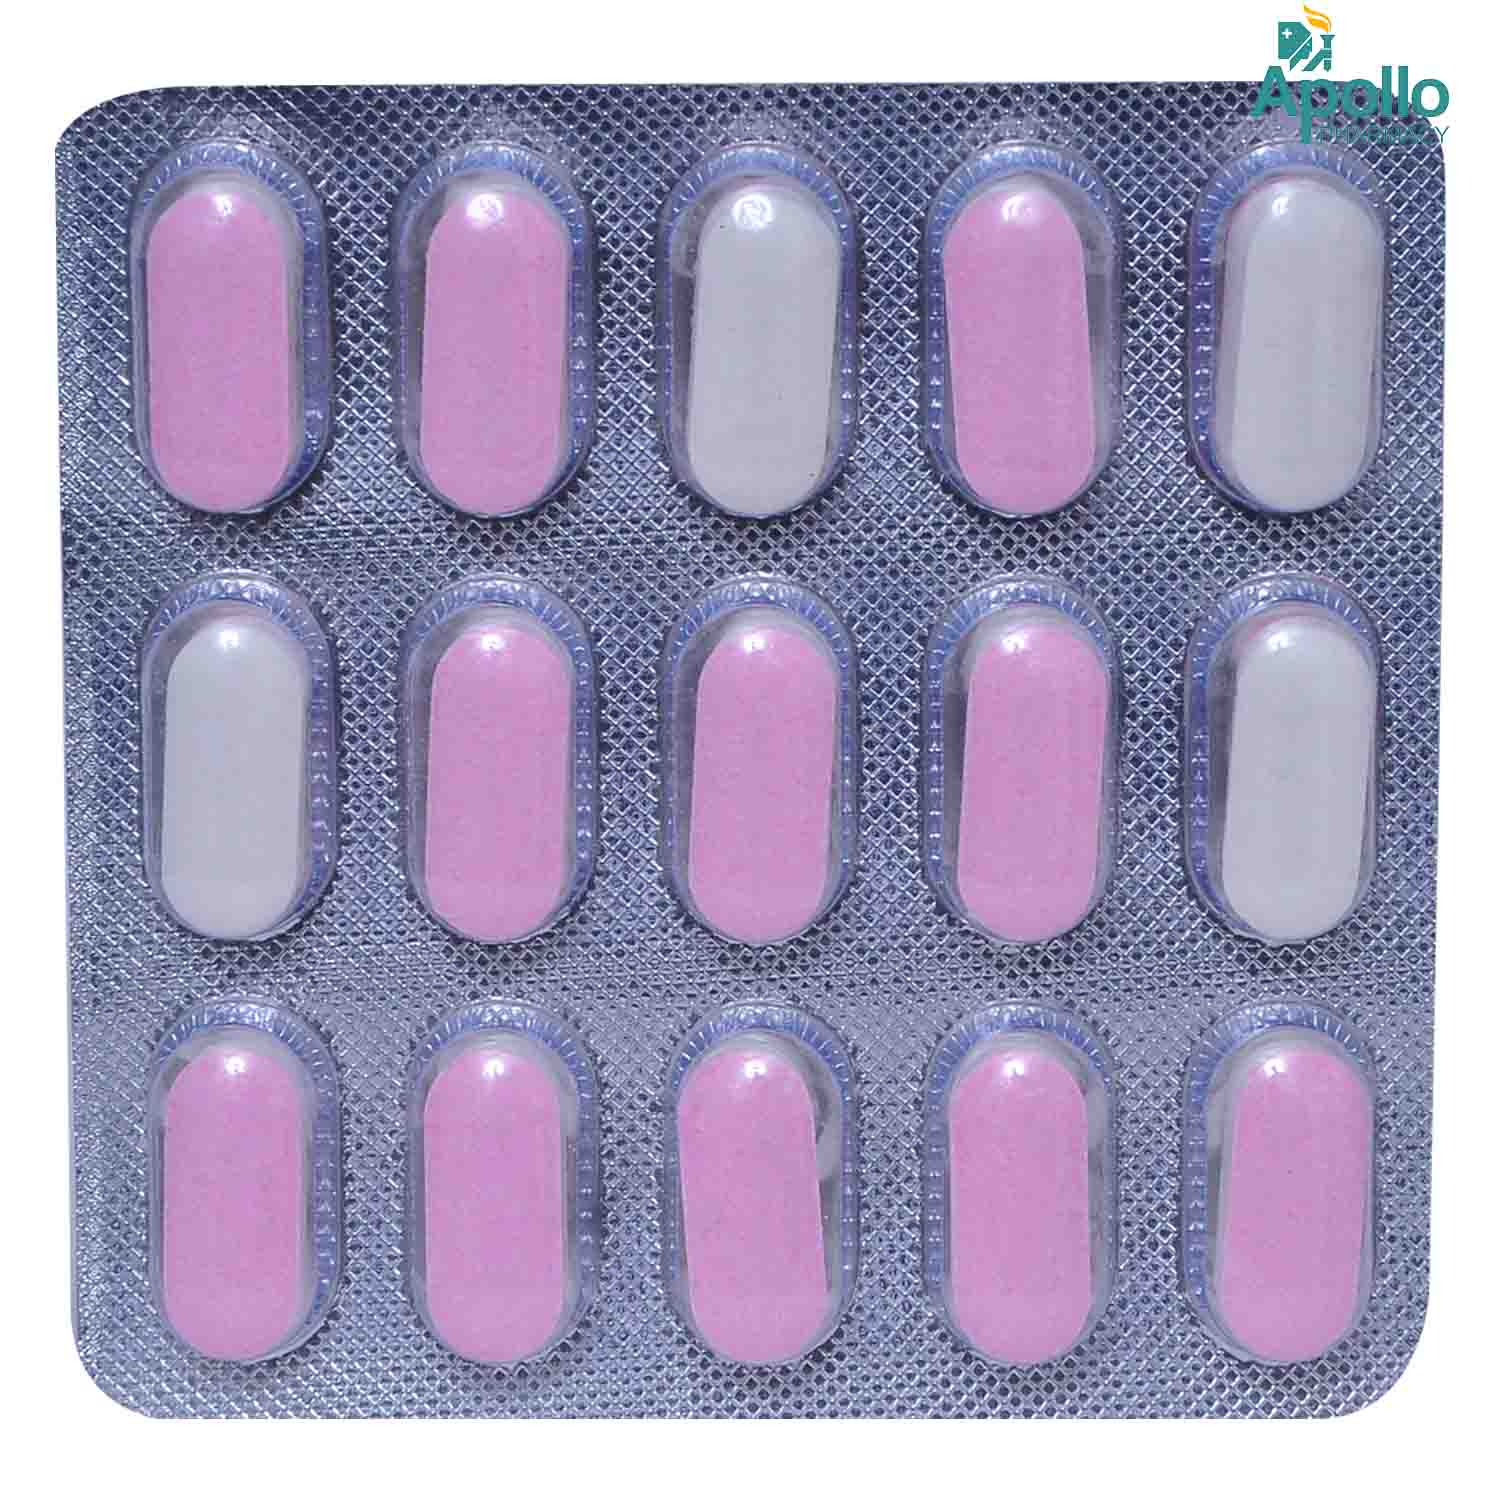 GLIMISAVE MAX 3MG TABLET, Pack of 15 TABLETS